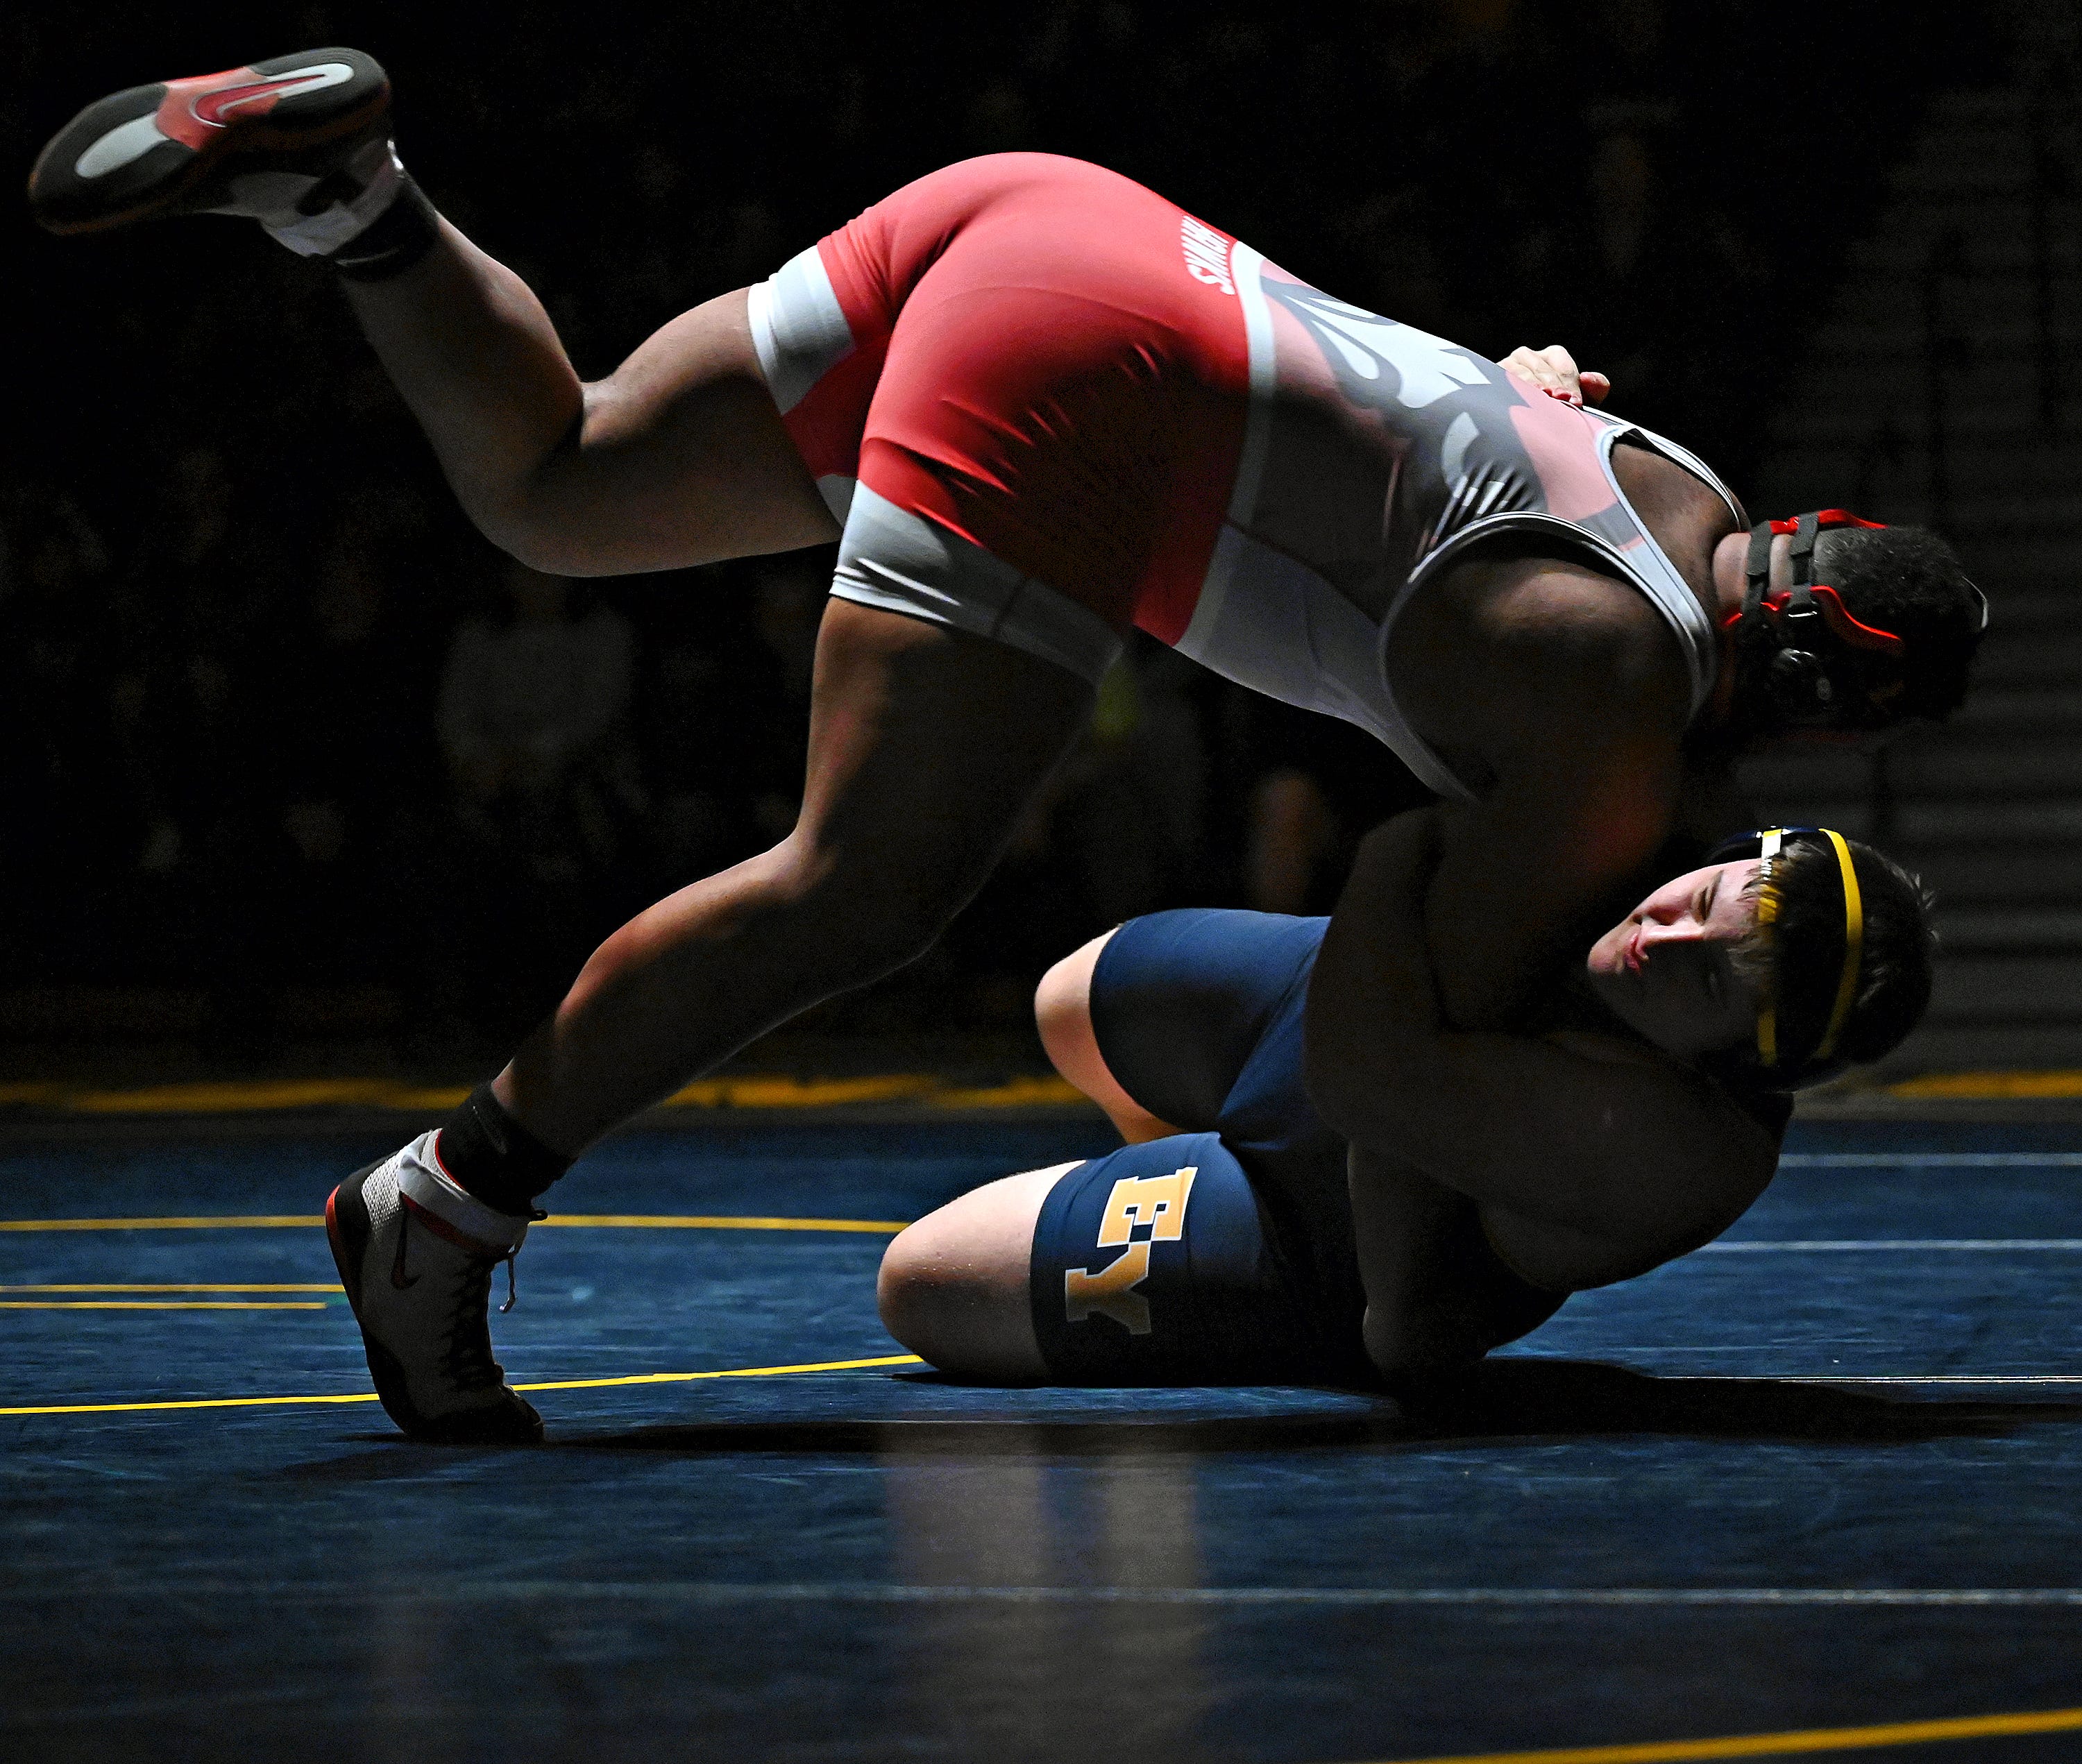 Eastern York’s Bryce Myers, bottom, and Hamburg’s Charles Sheppard compete in the 285-pound weight class during PIAA District 3, Class 2-A first round wrestling action at Eastern York High School in Lower Windsor Township, Monday, Jan. 30, 2023. Myers would win with a pin at 0:35 and Eastern York would win the meet 50-22. Dawn J. Sagert photo